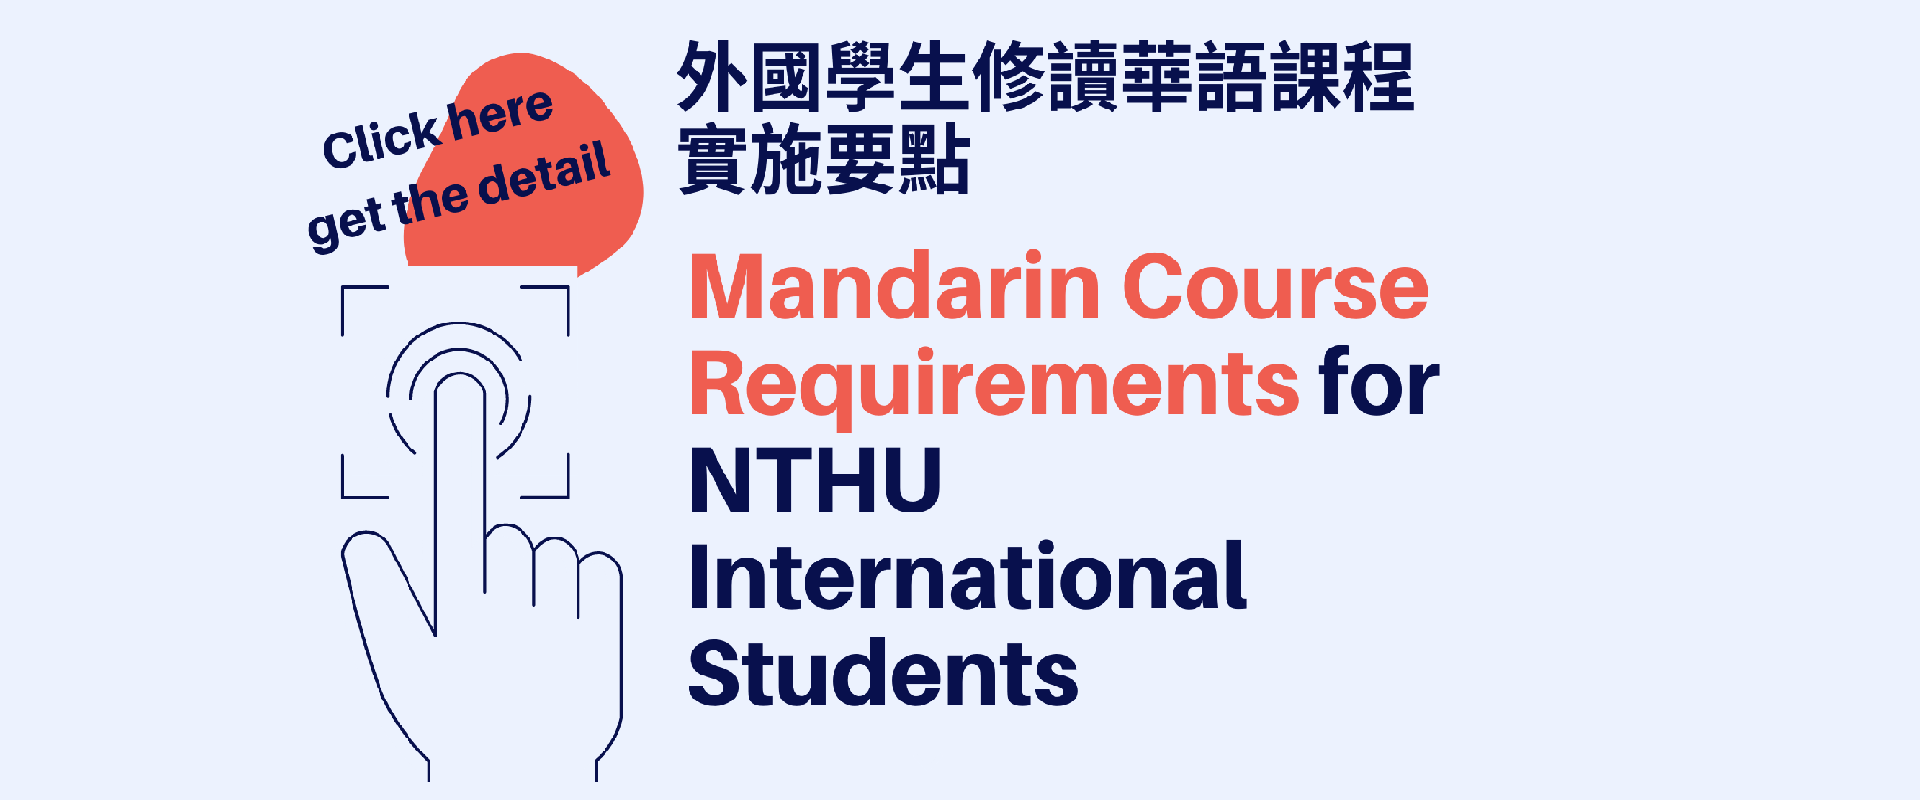 Mandarin Course Requirements for NTHU International Students